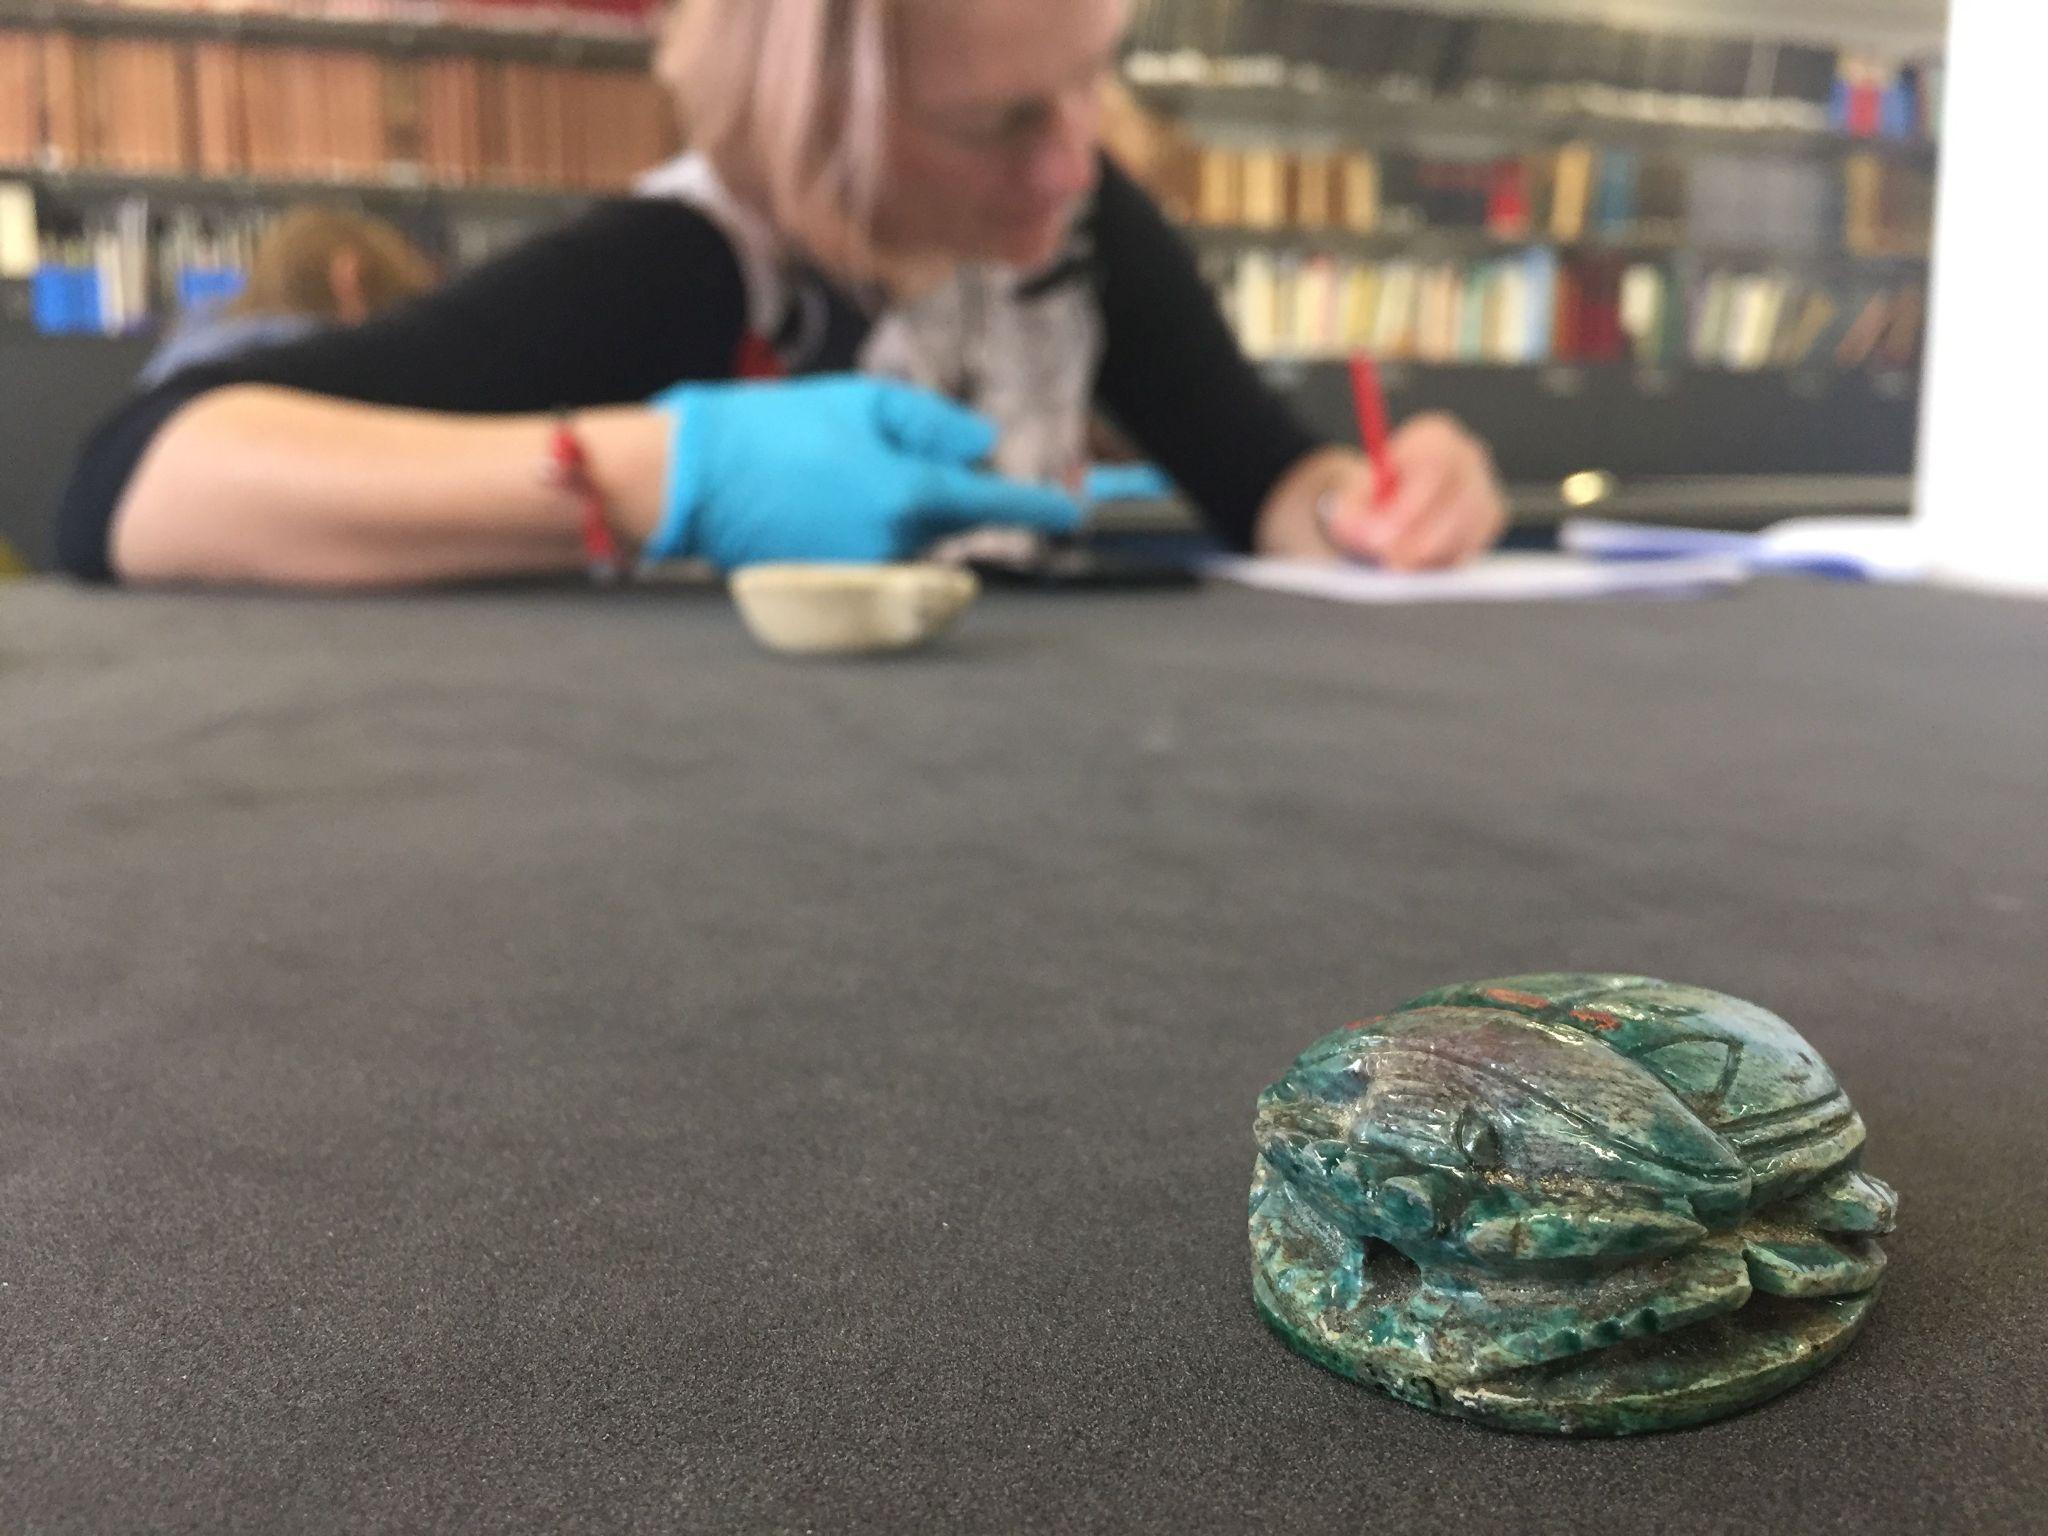 A Victorian forged Egyptian scarab beetle in the foreground, during an object-based learning ‘ways of looking’ learning activity in the Hunterian Museum teaching collections.